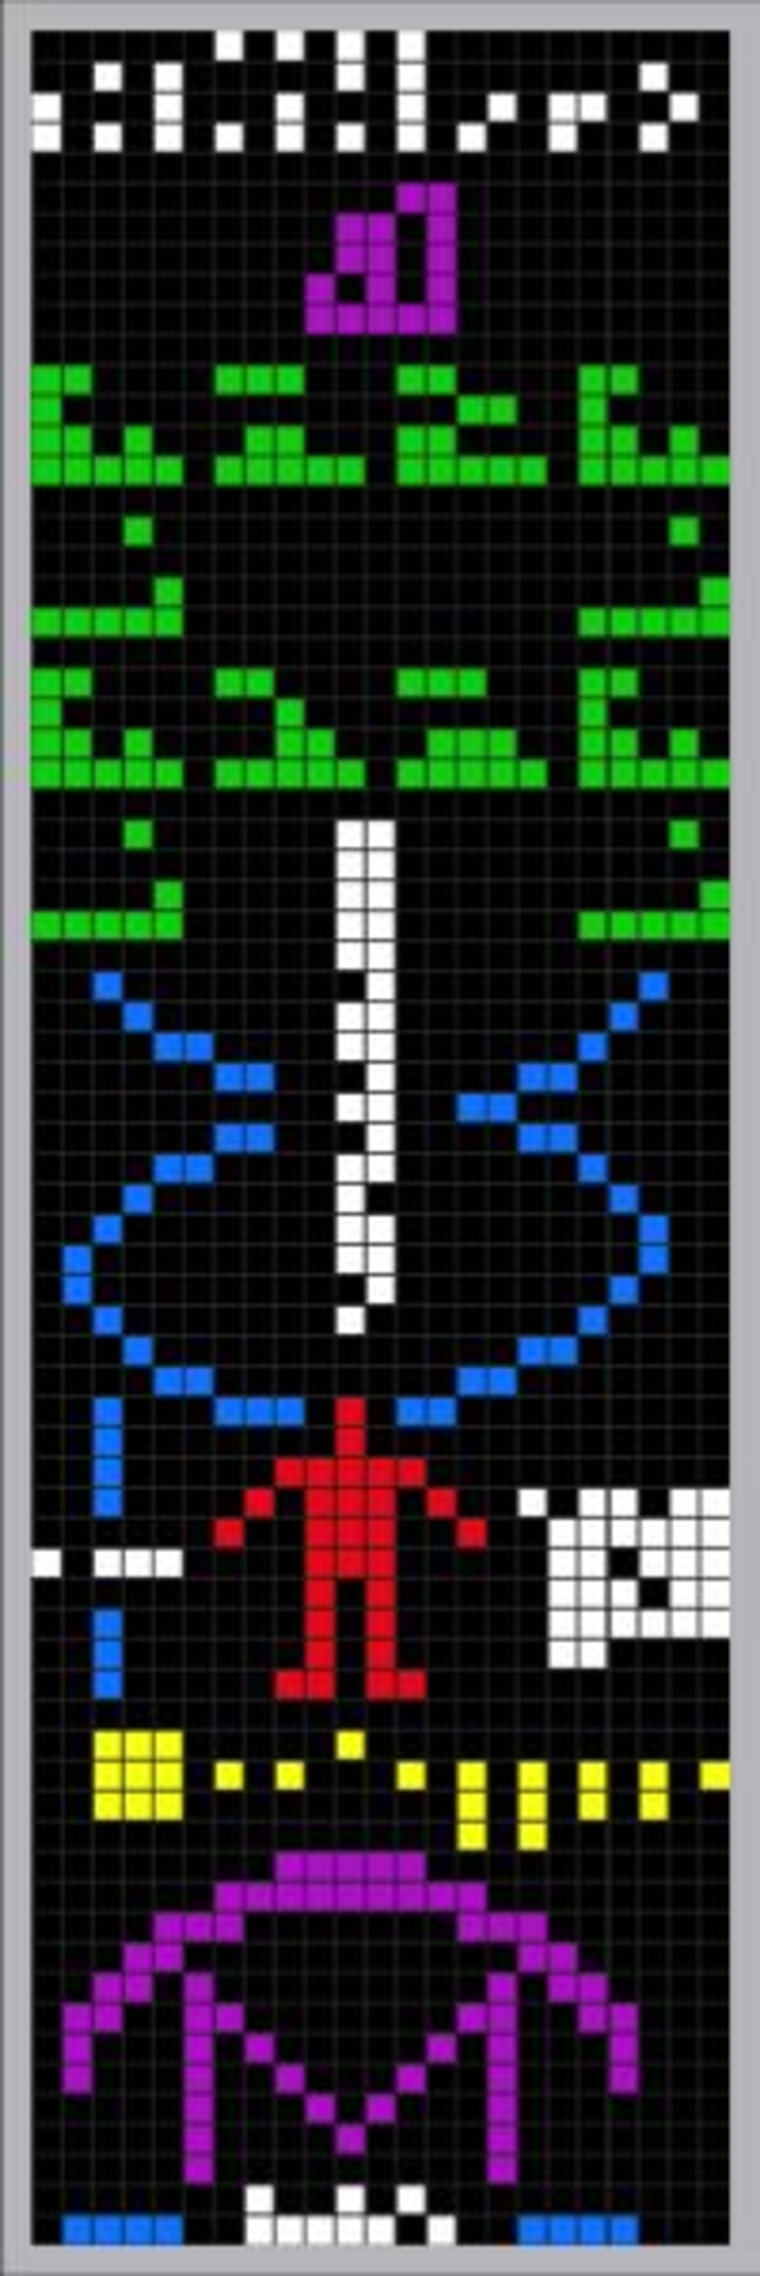 This graphic was transmitted in coded form in 1974, using the Arecibo radio telescope. Click on the picture for an explanation of the code.